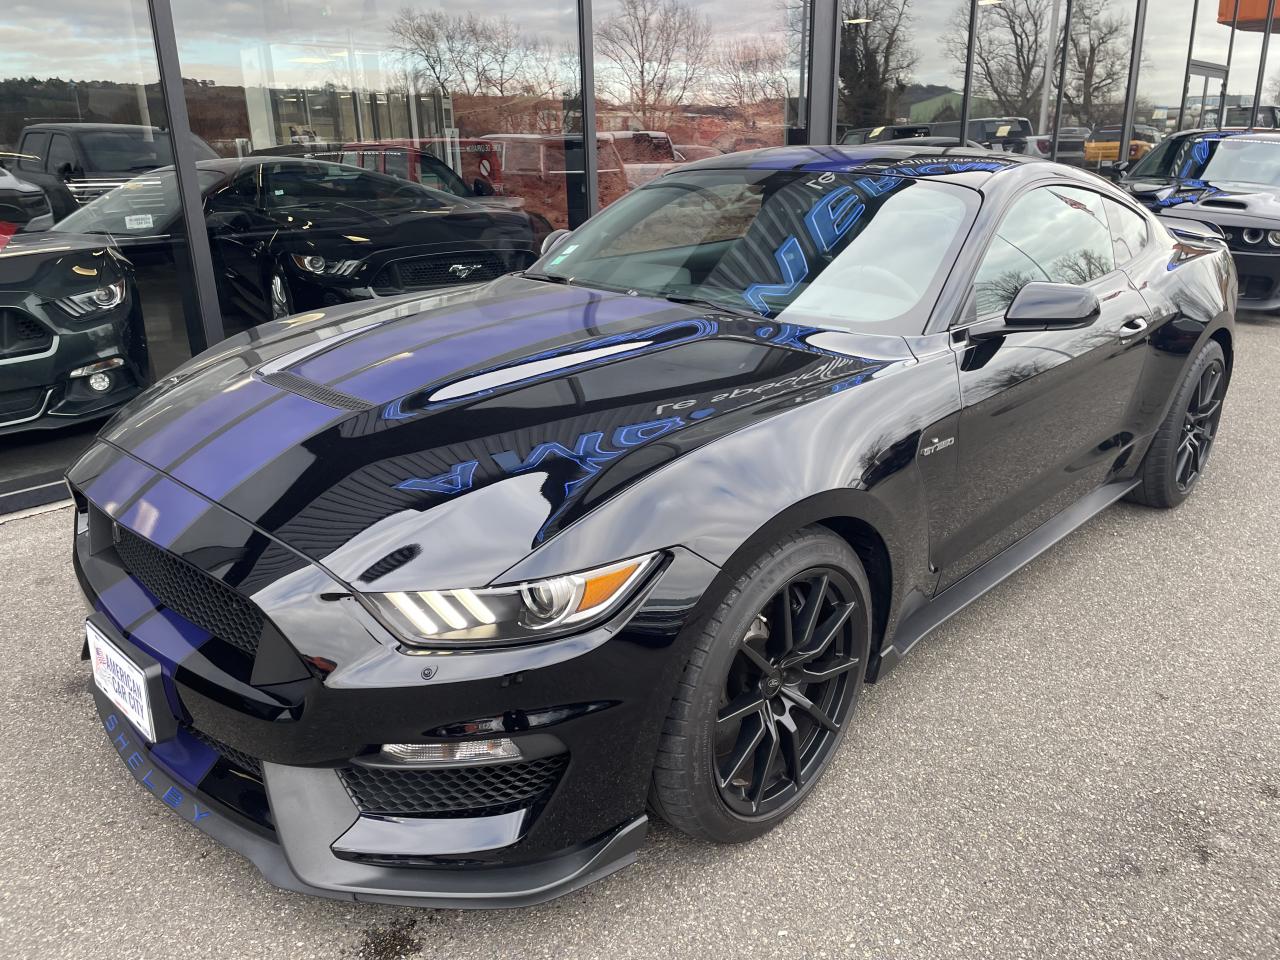 FORD MUSTANG Shelby GT350 v8 5.2l 526ch